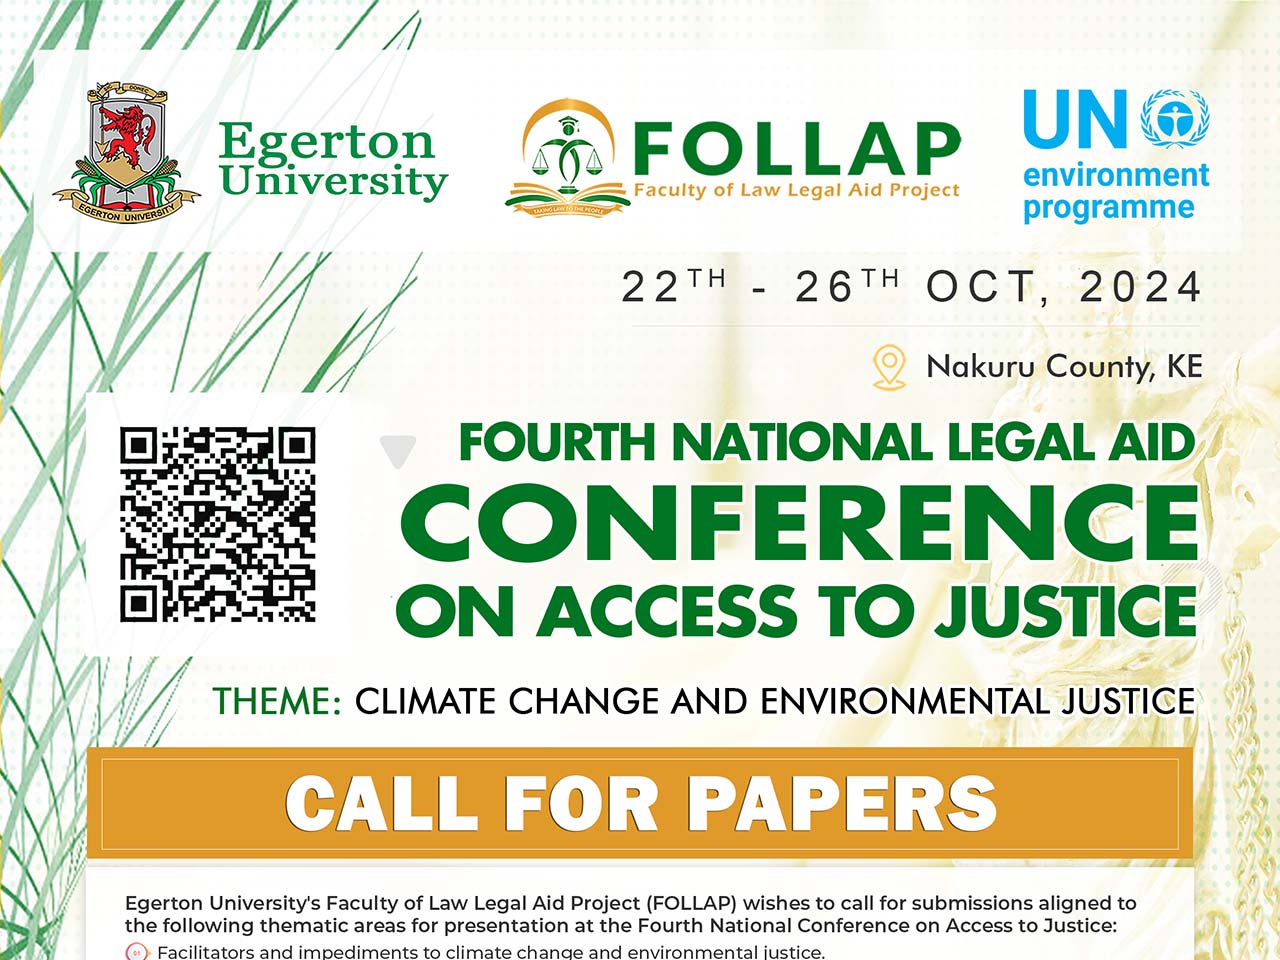 Fourth National Legal Aid Conference on Access to Justice